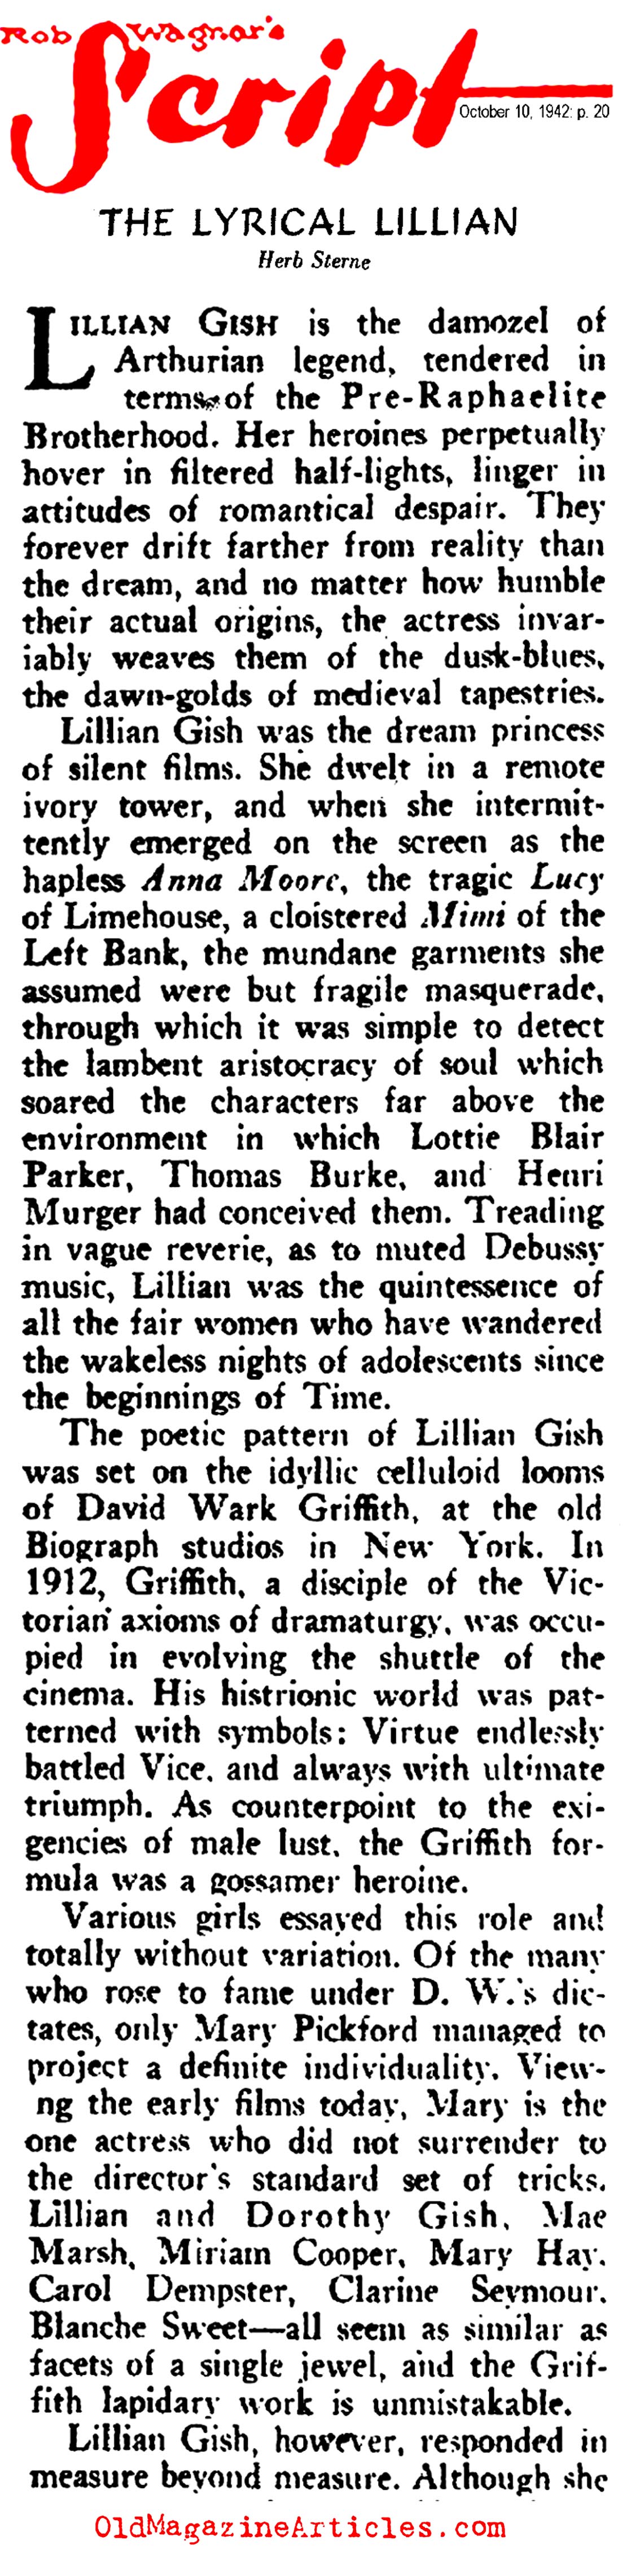 The Career of Lilian Gish<BR> (Rob Wagner's Script Magazine, 1942)